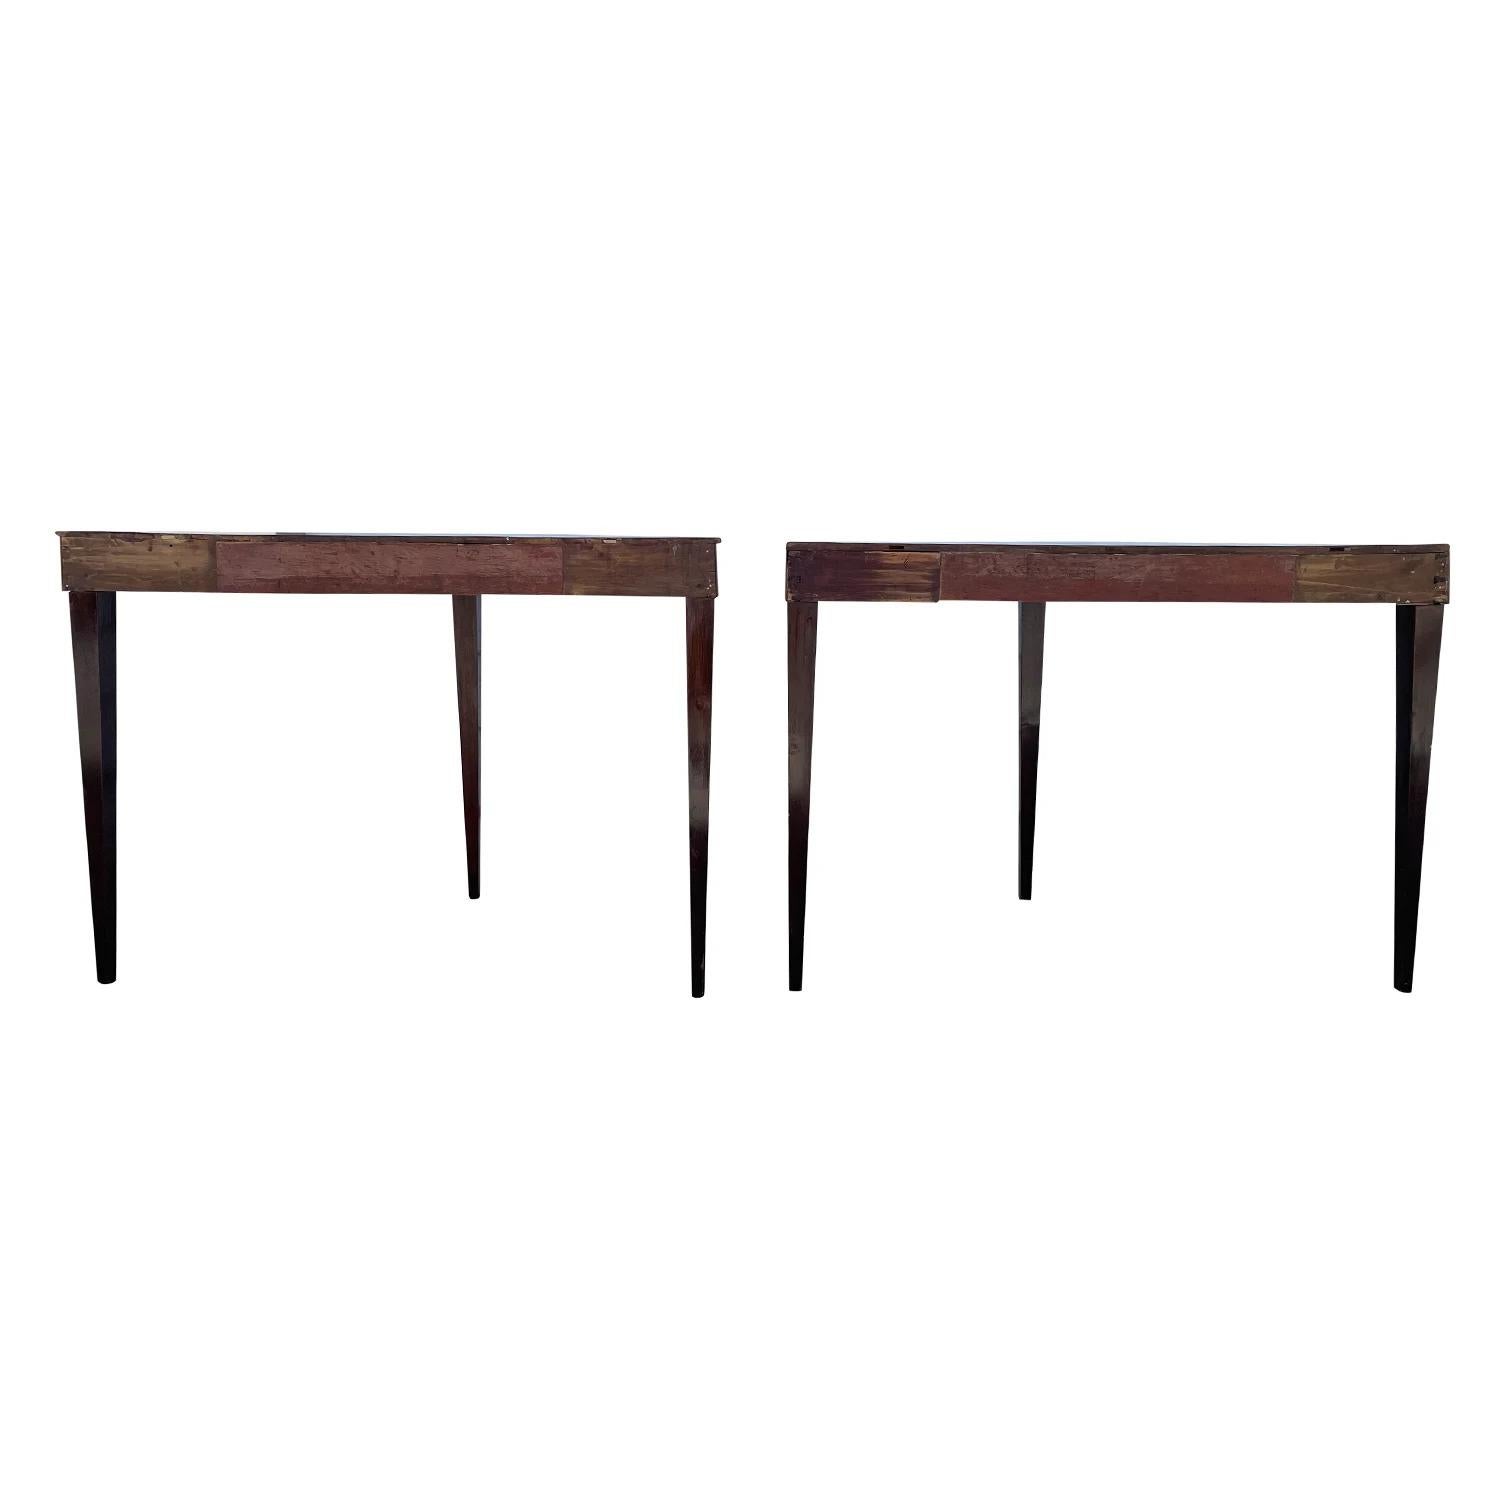 Gustavian 19th Century Swedish Antique Pair of Demi-Lune Polished Mahogany Side Tables